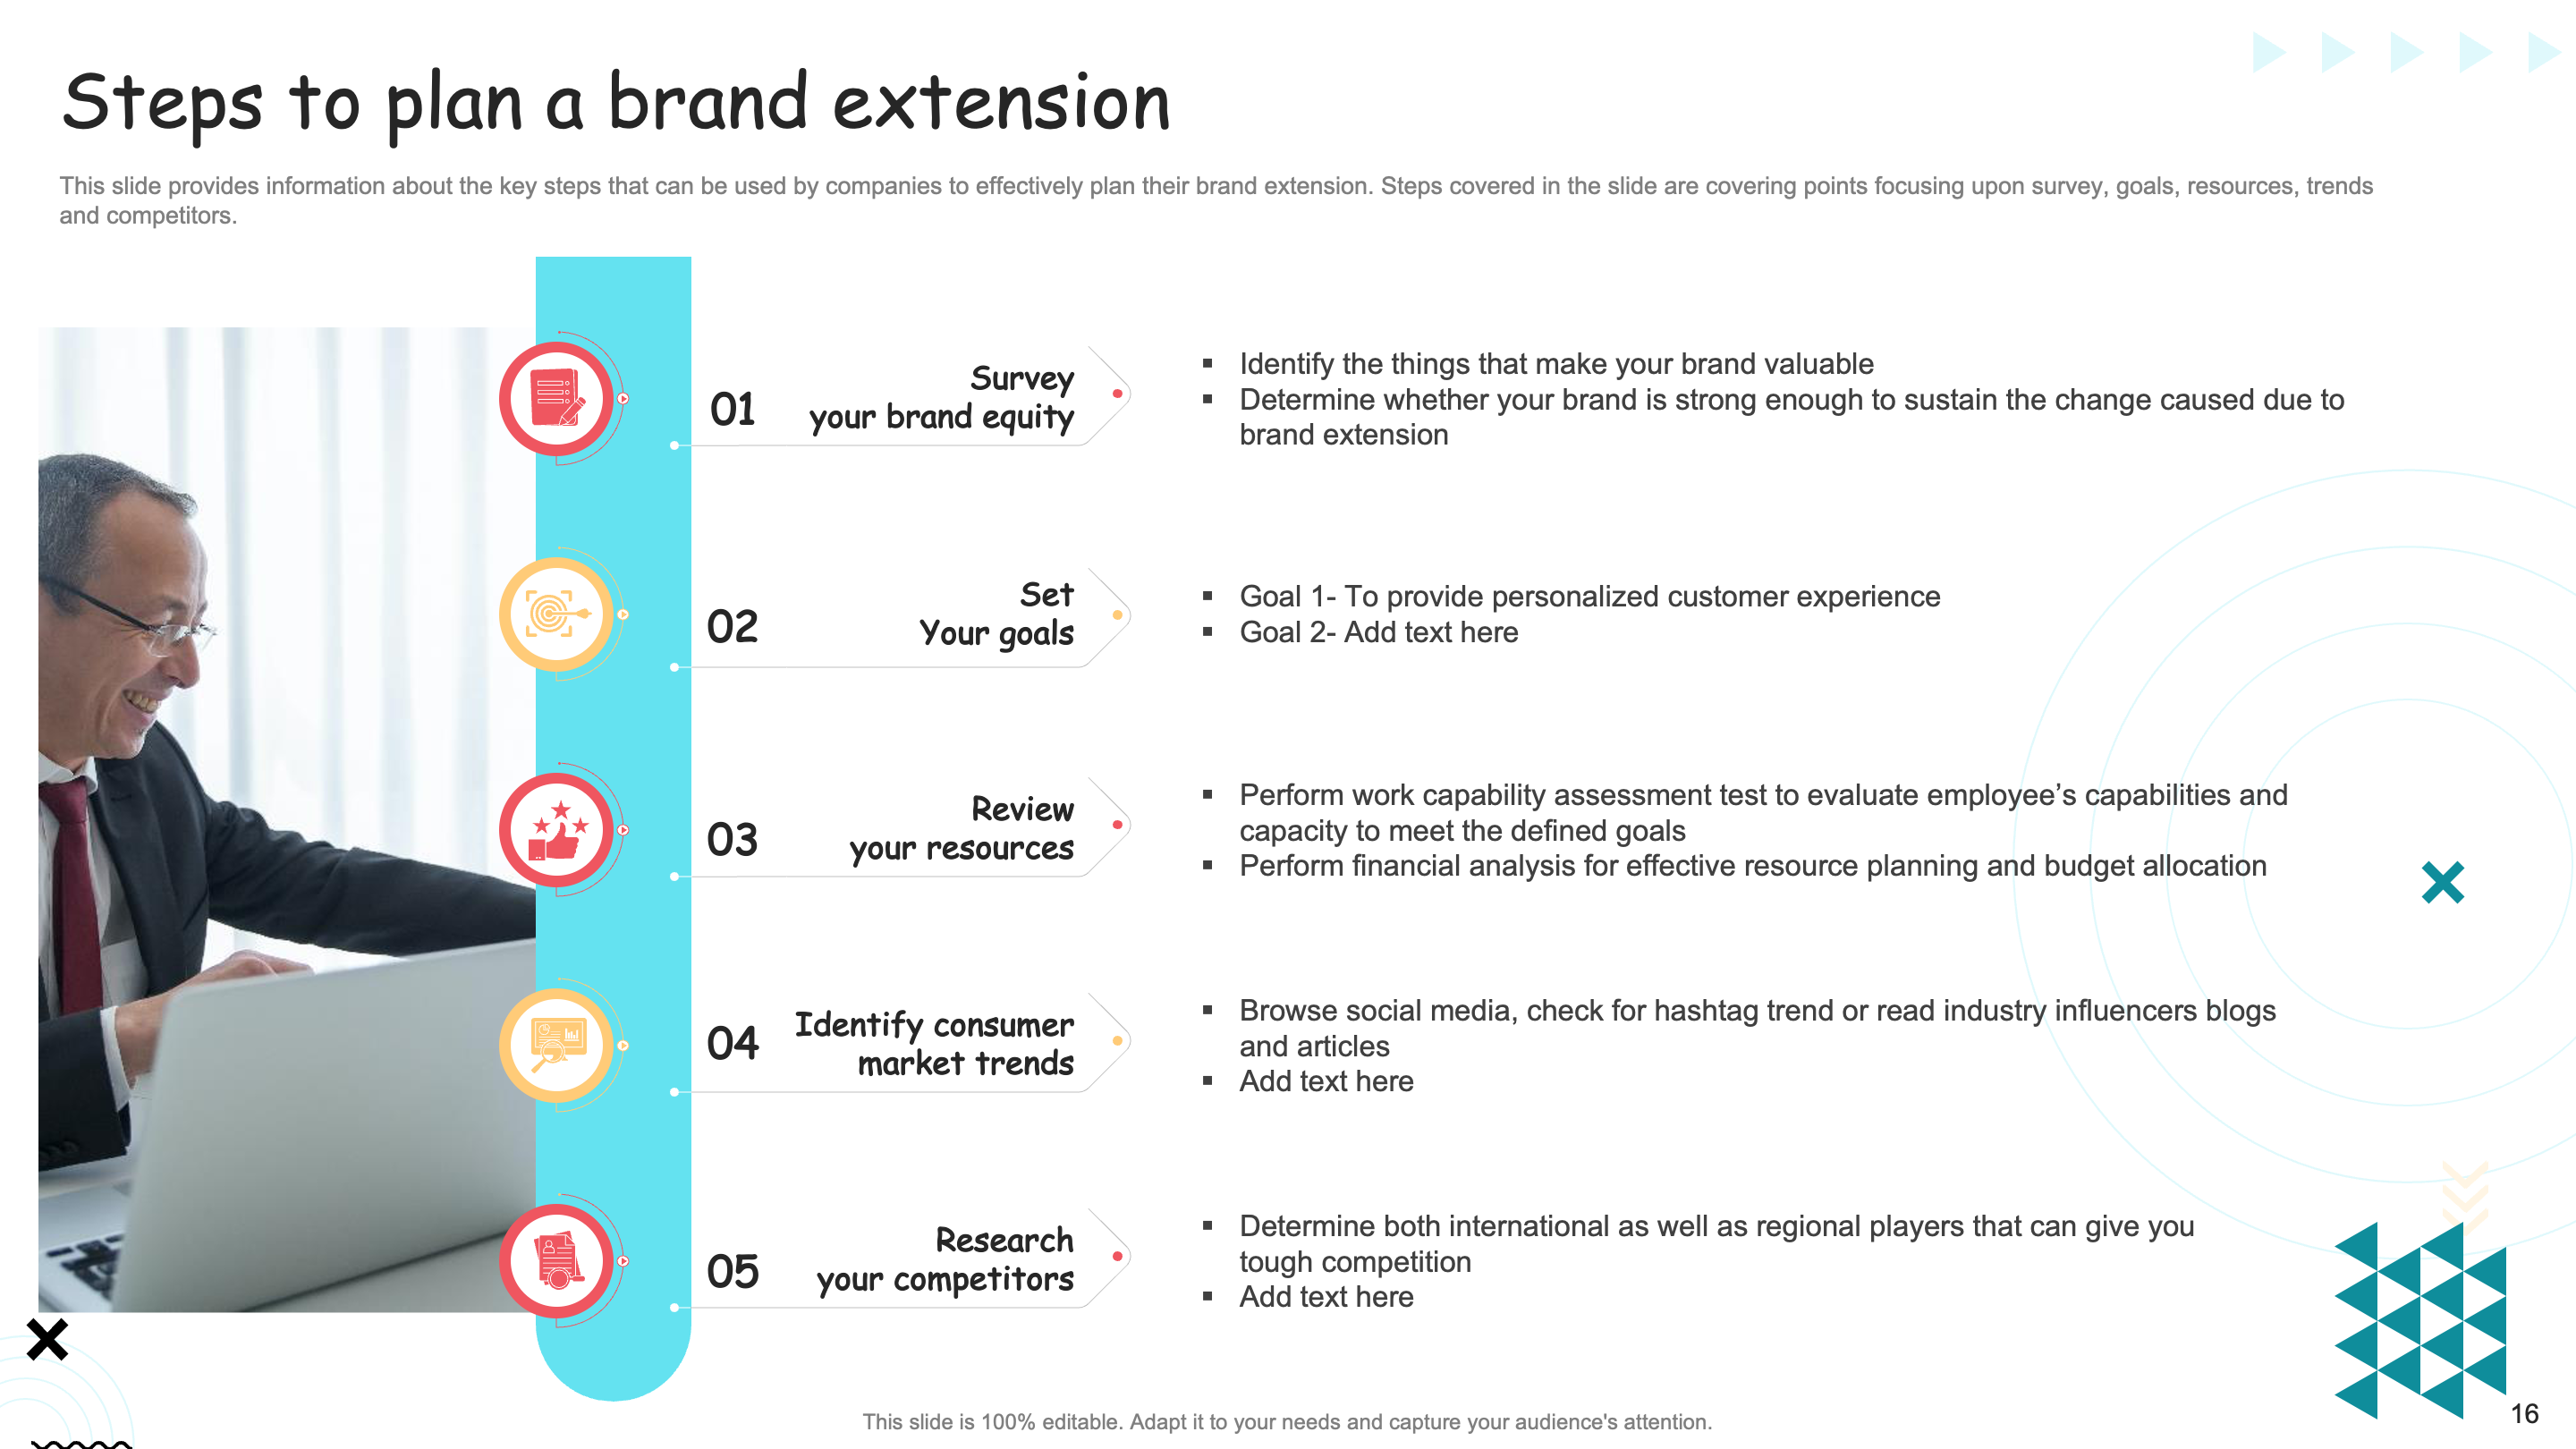 Steps to Plan a Brand Extension